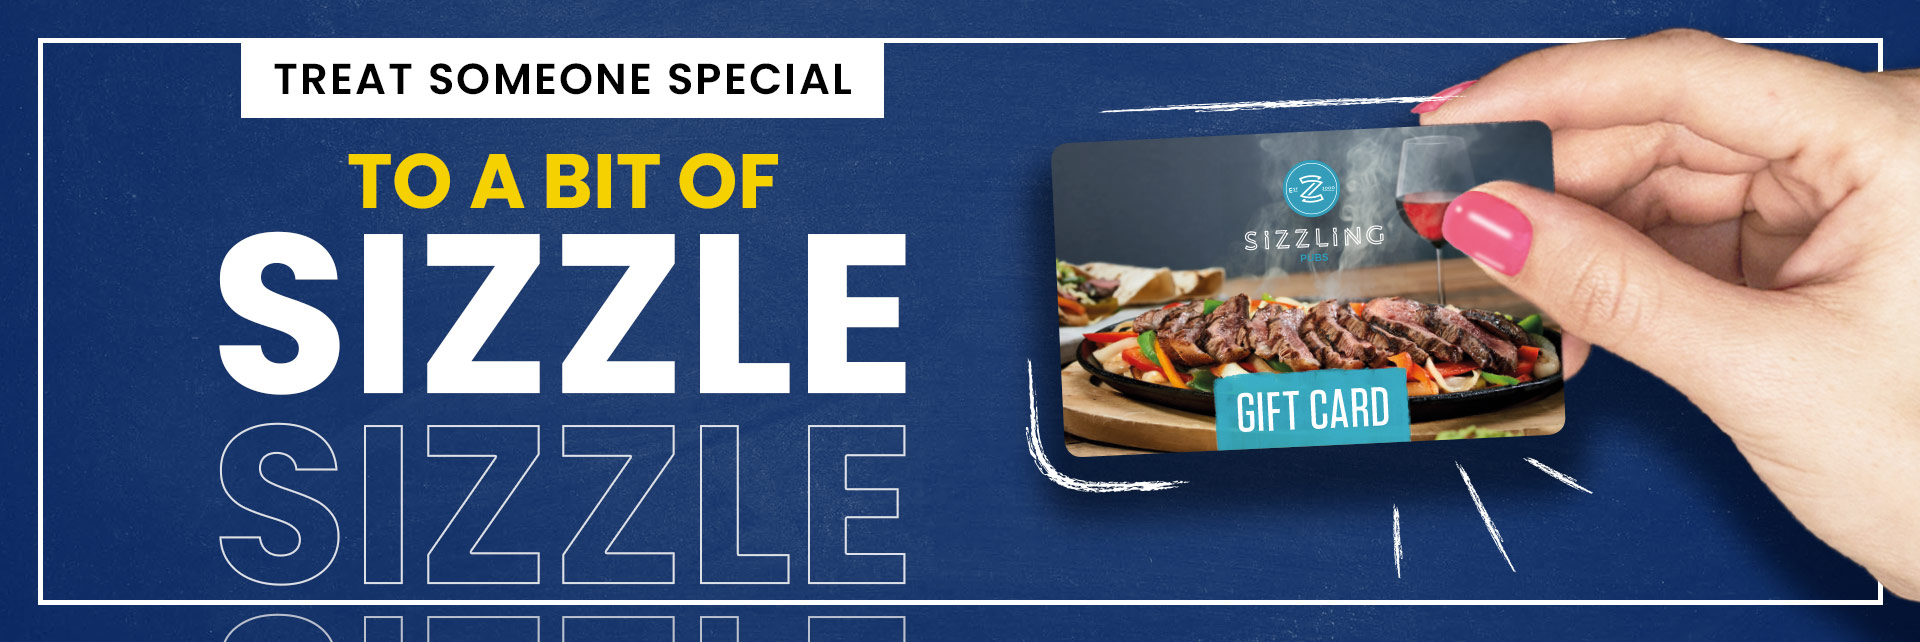 Sizzling Pubs Gift Card at The Hazelwell in Birmingham